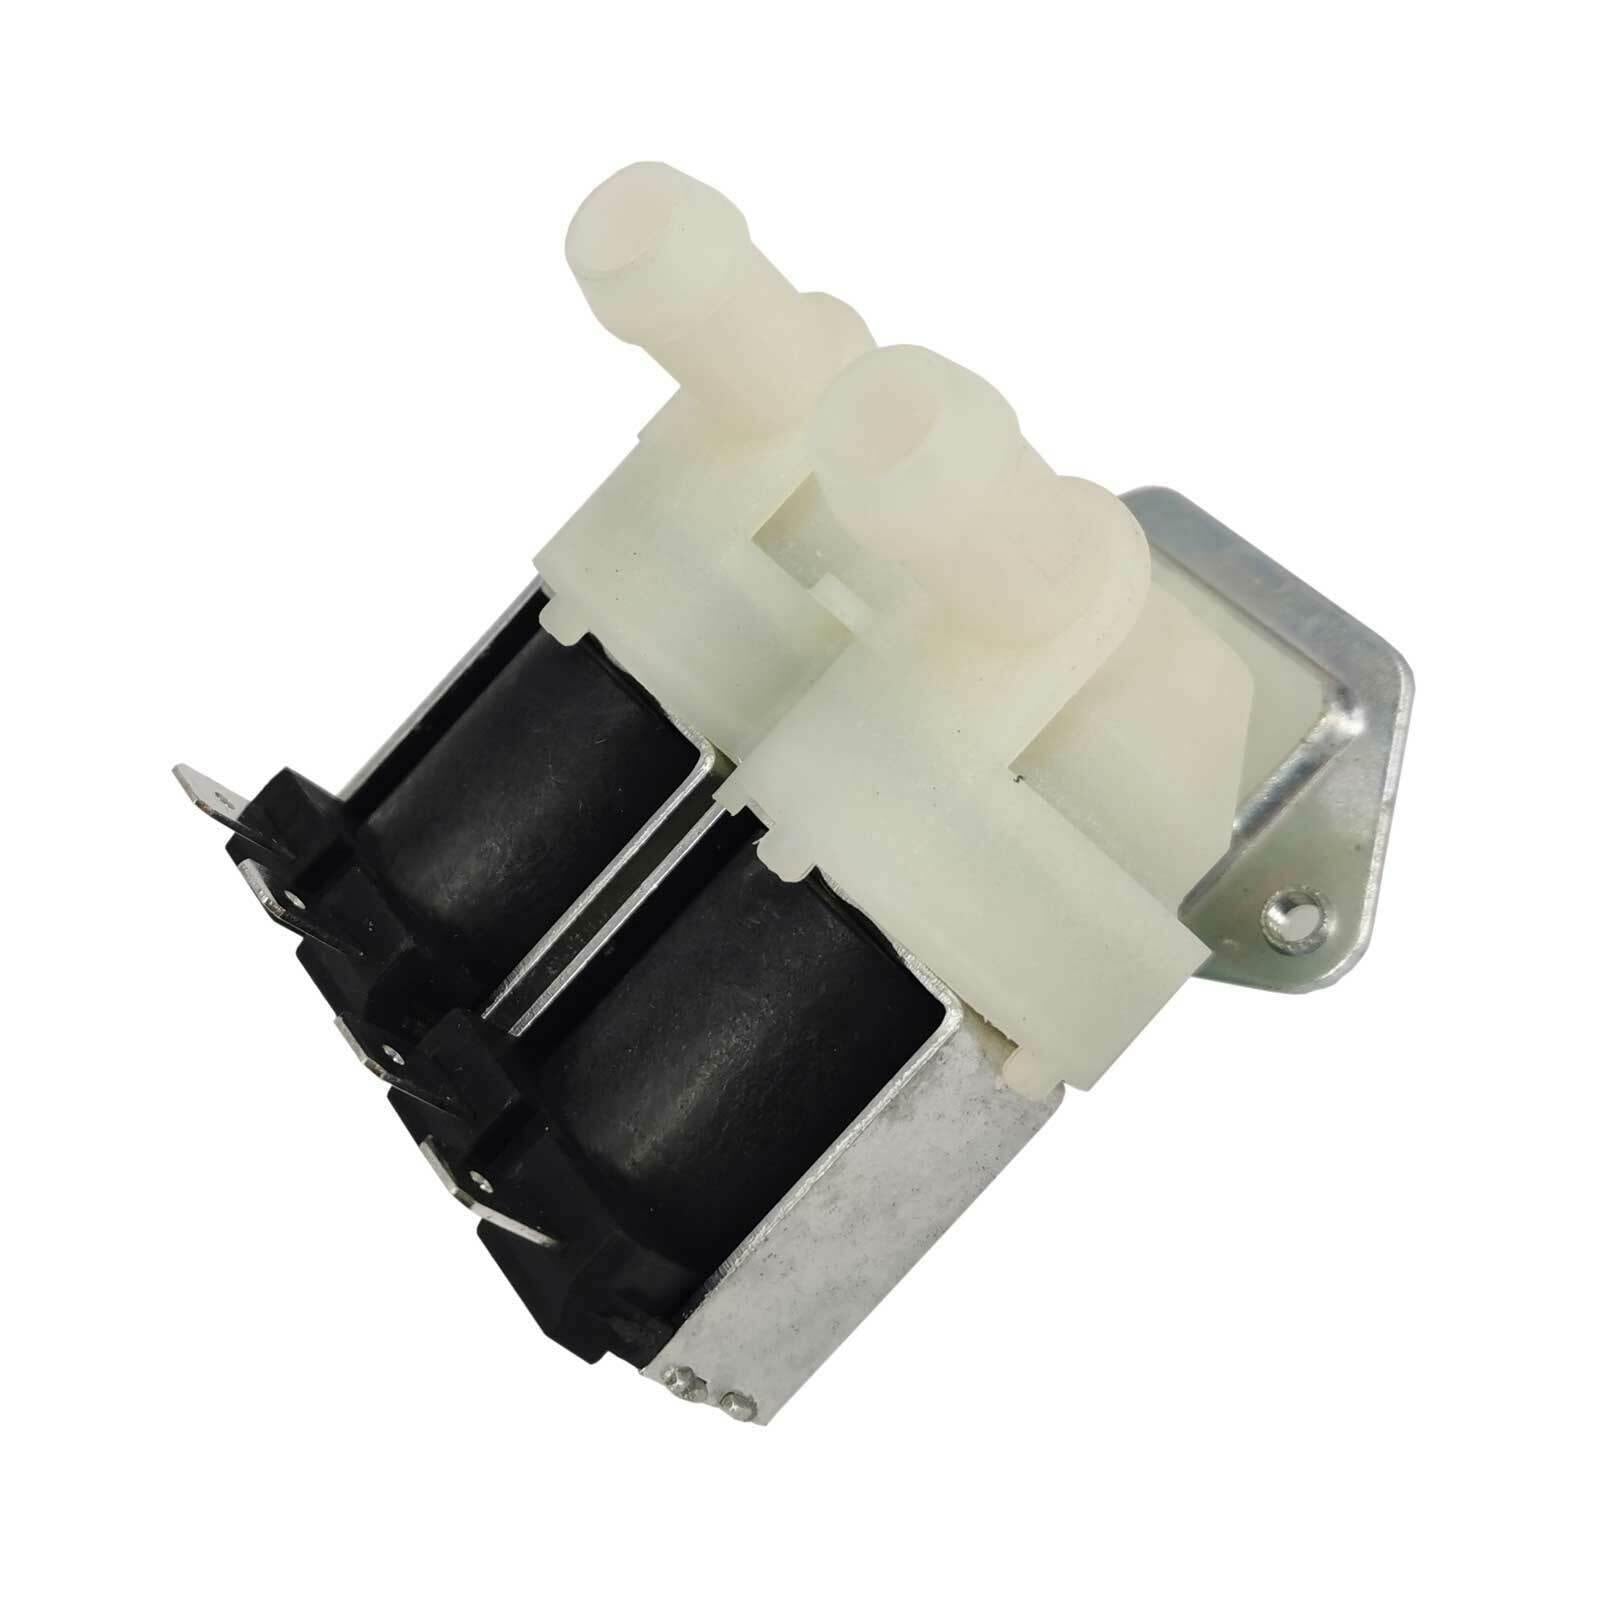 Washing Machine Double Dual Inlet Valve For LG Front load 5220FR1251E 0034 Sparesbarn